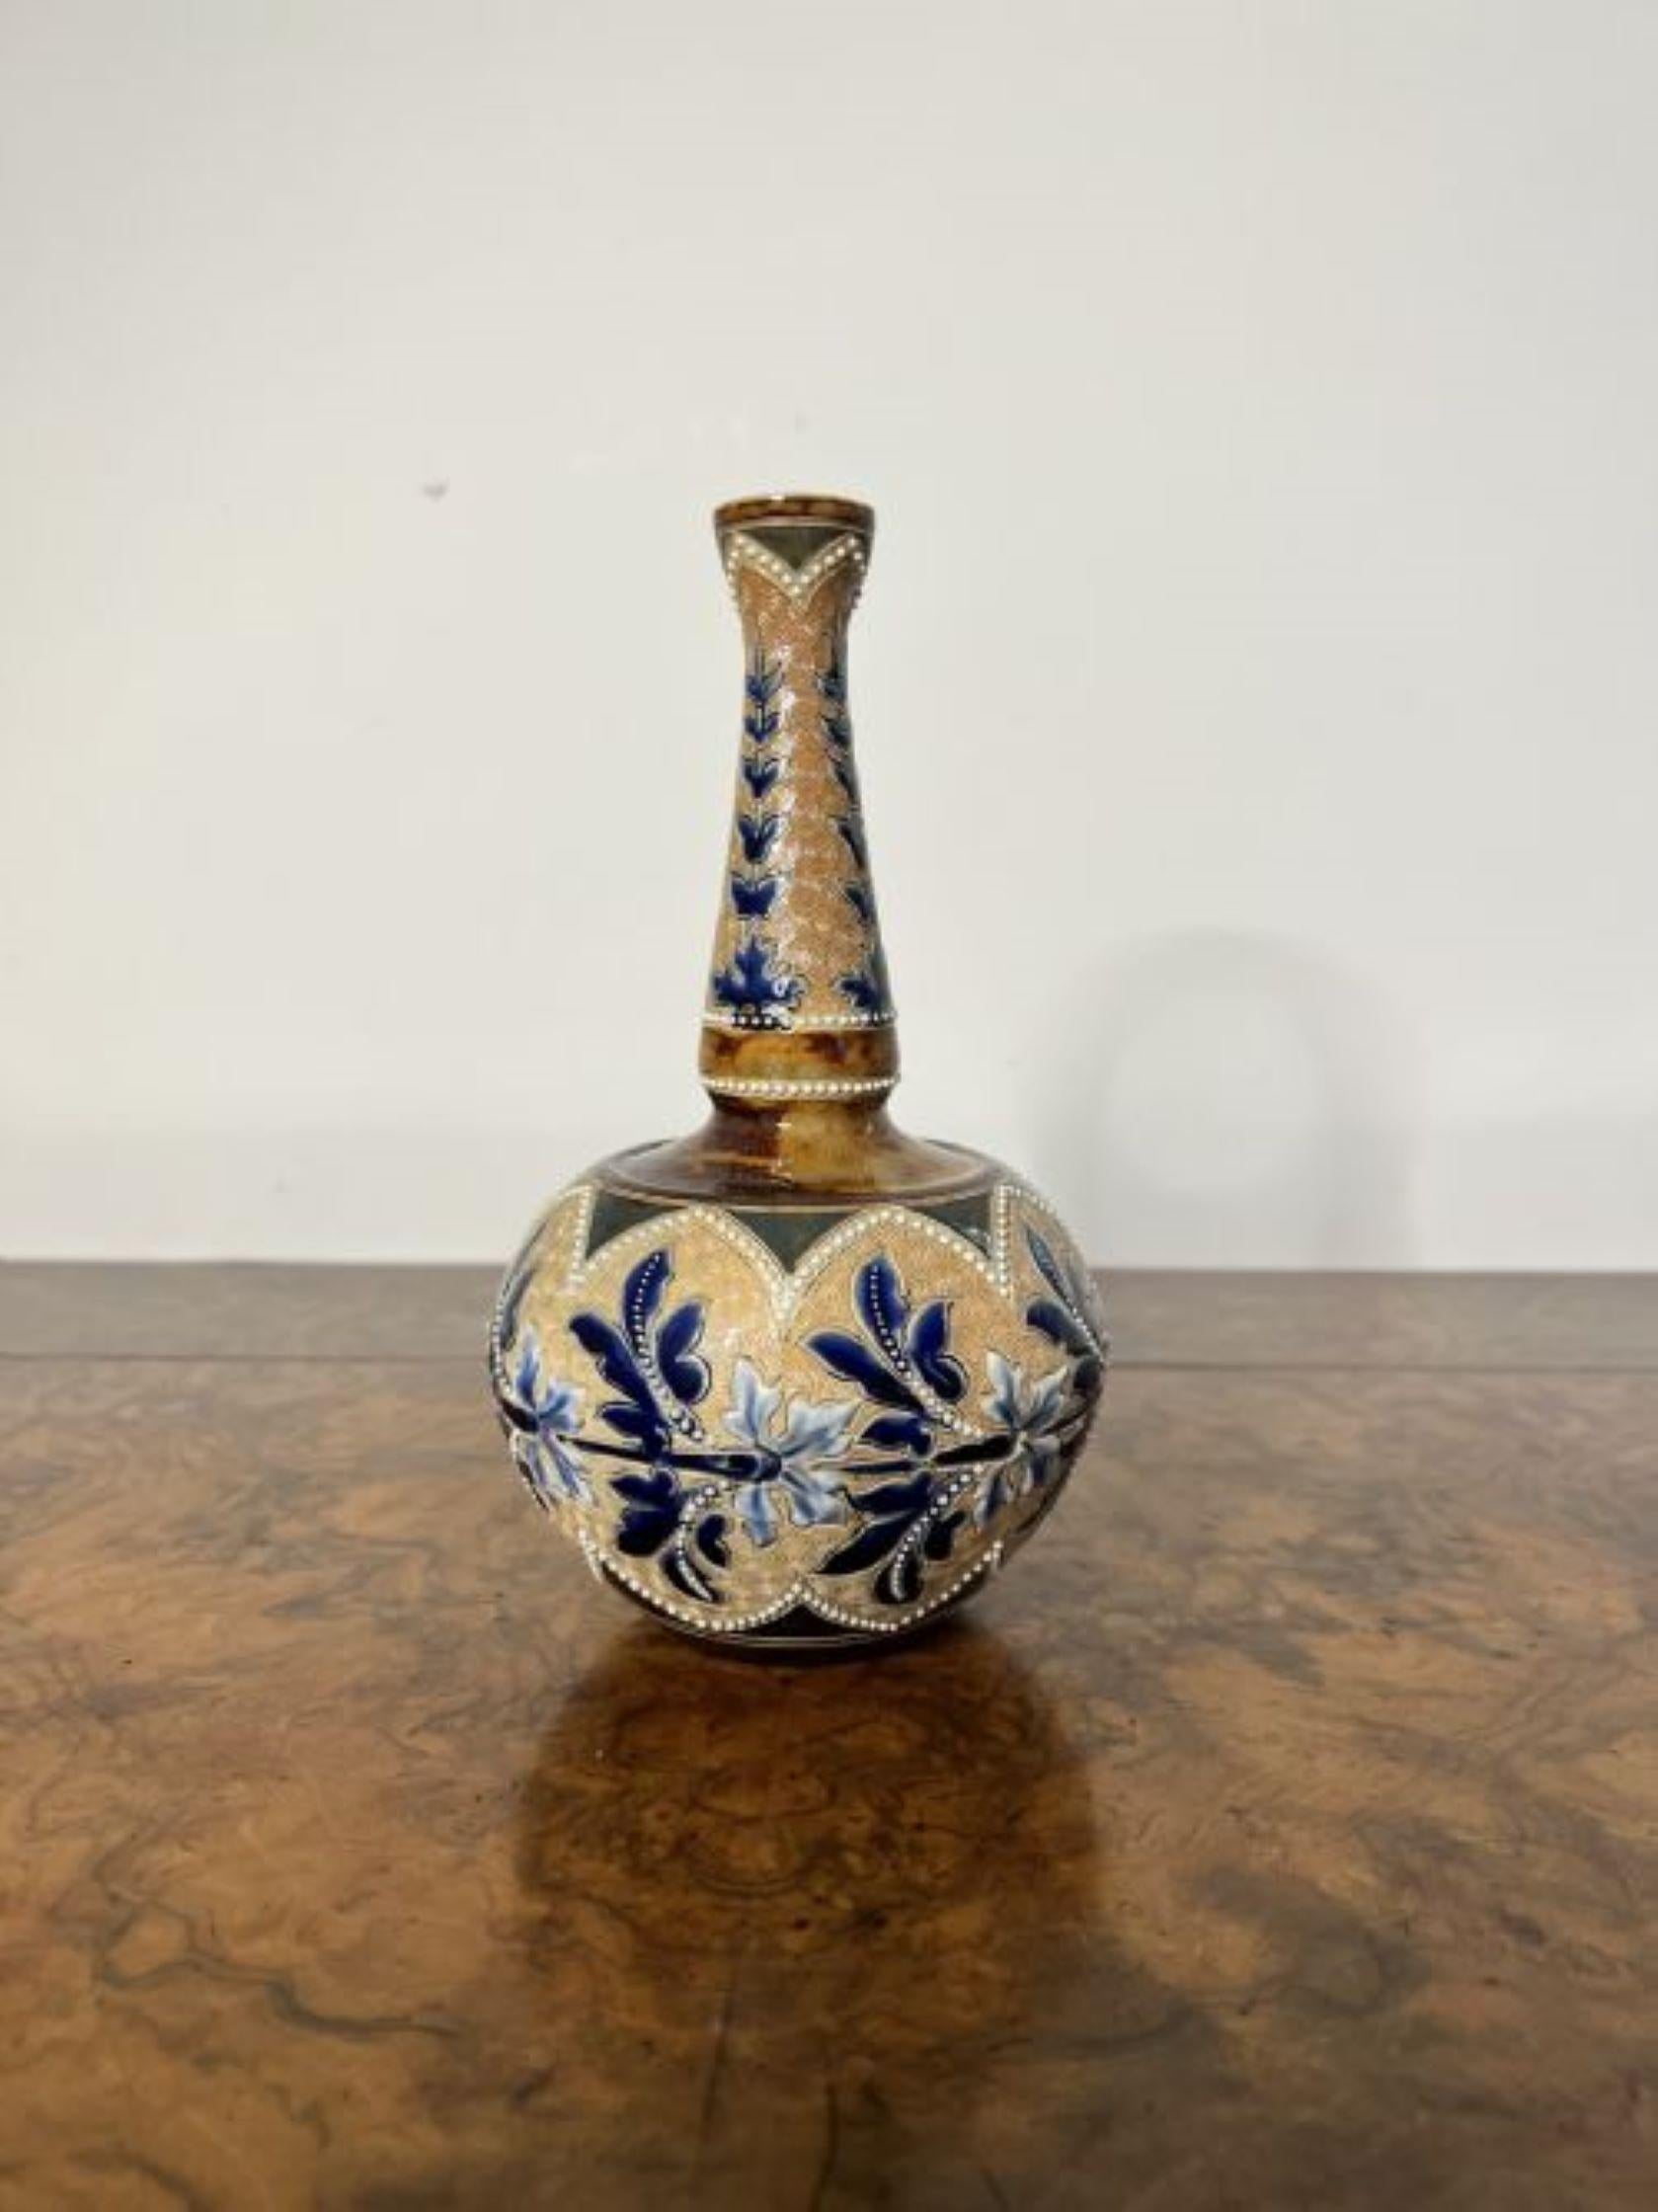 Fantastic quality antique Doulton Lambeth vase, having a quality antique Doulton Lambeth vase made for the Art Union of London by Emily Stormer having a bulbous body with a tall shaped slender neck with fantastic floral decoration throughout in